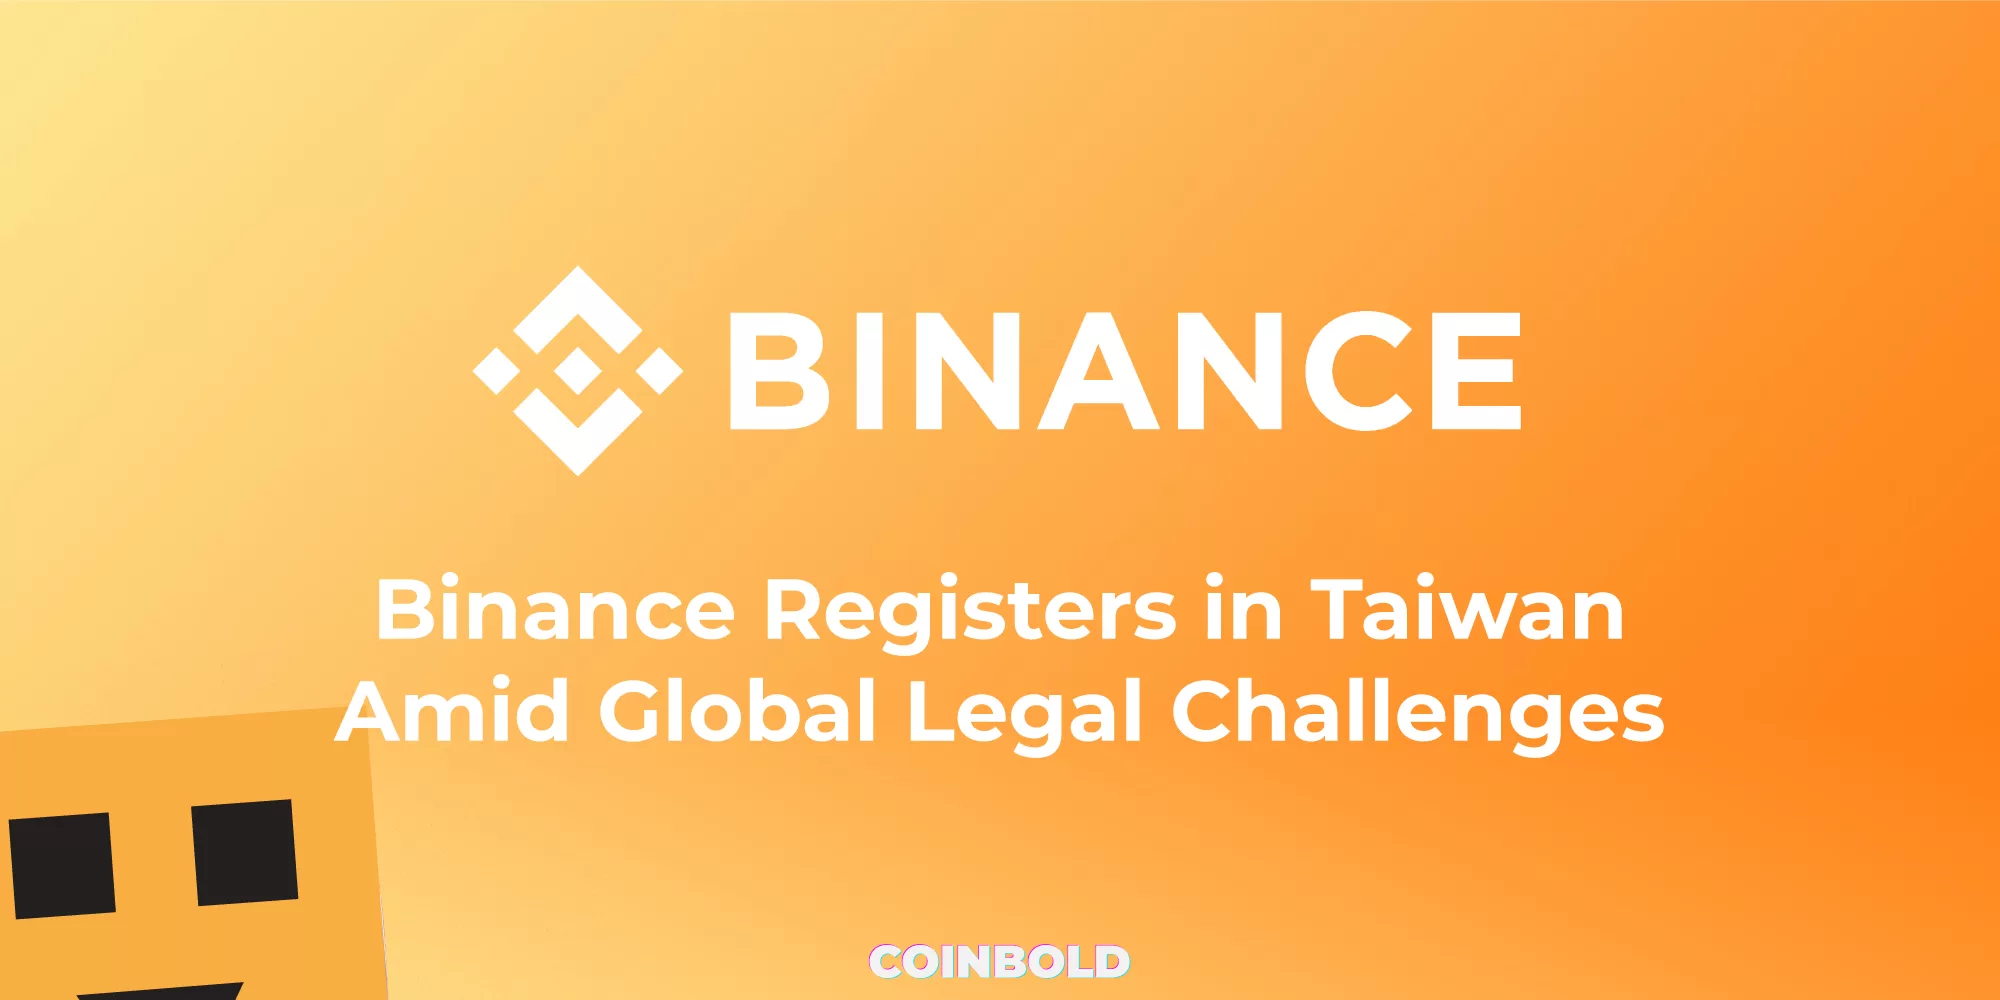 Binance Registers in Taiwan Amid Global Legal Challenges